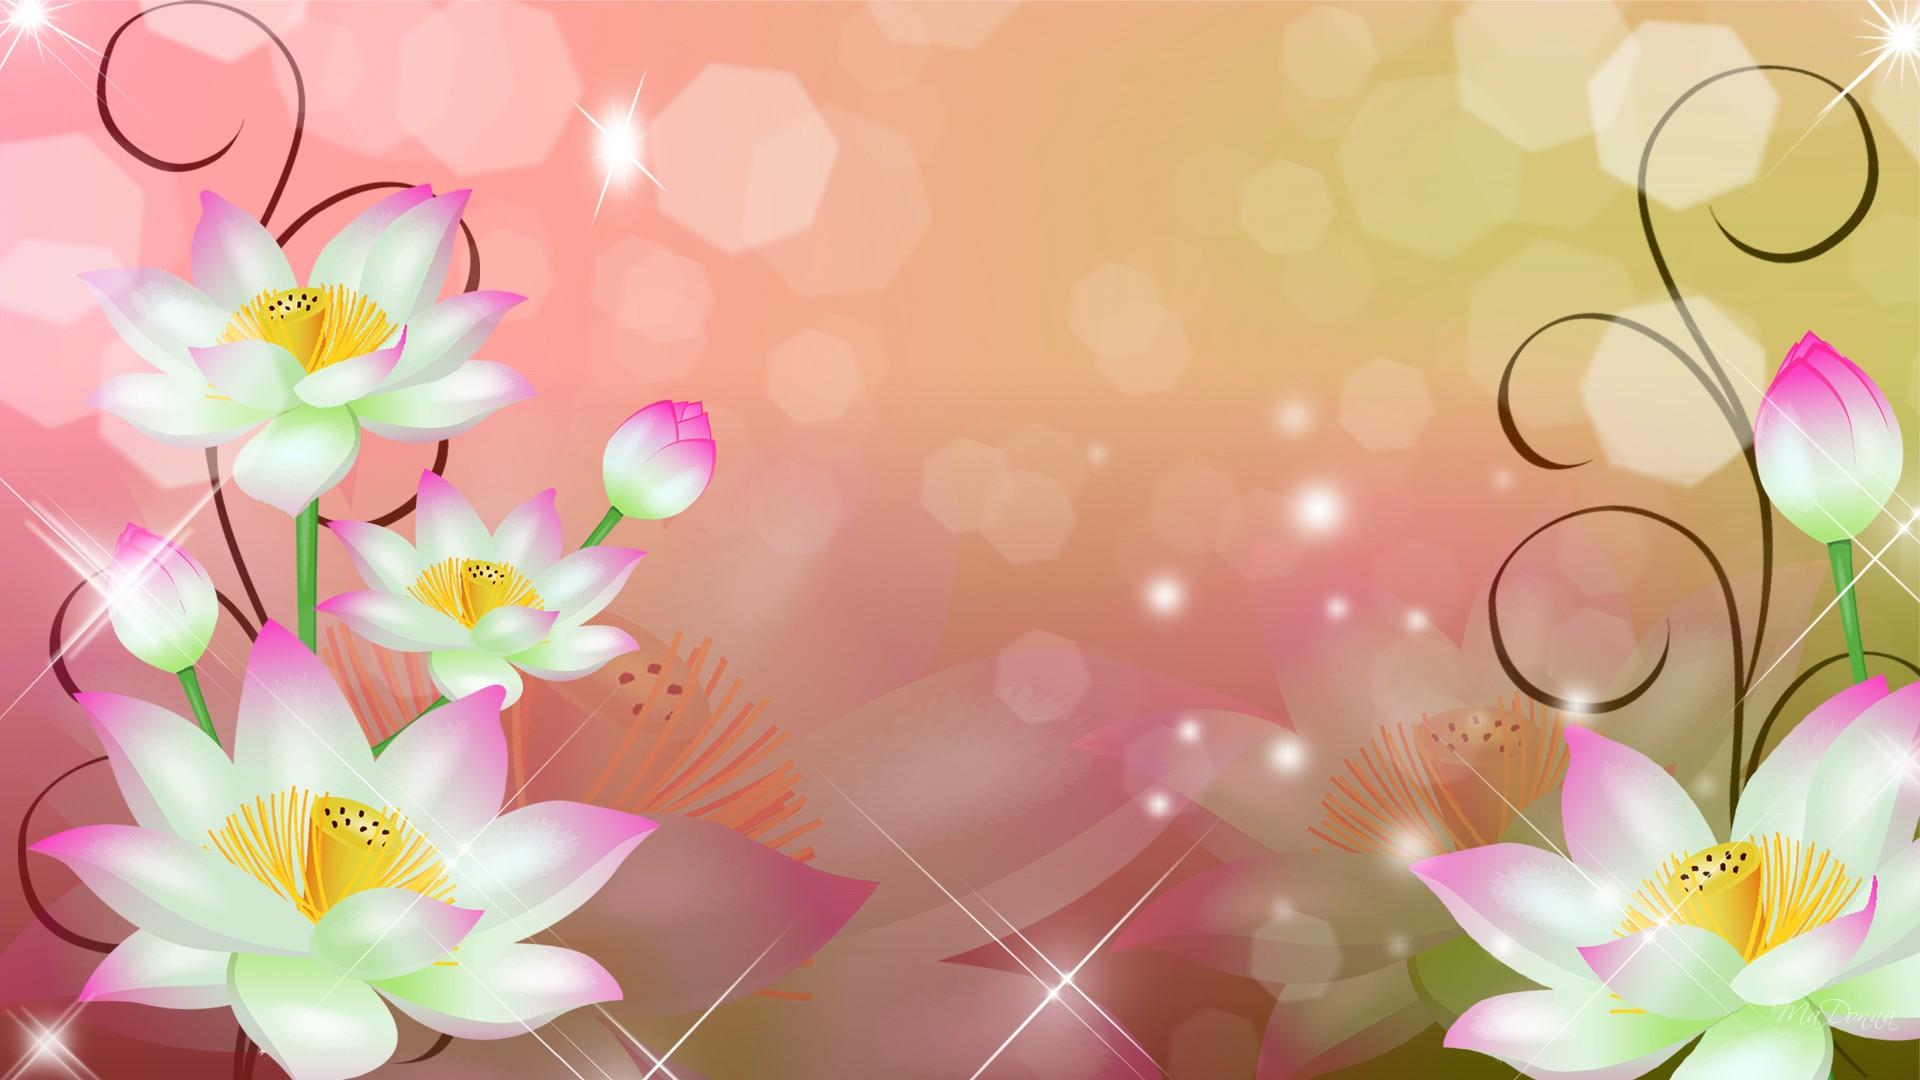 Flowers Background Wallpapers Hd.